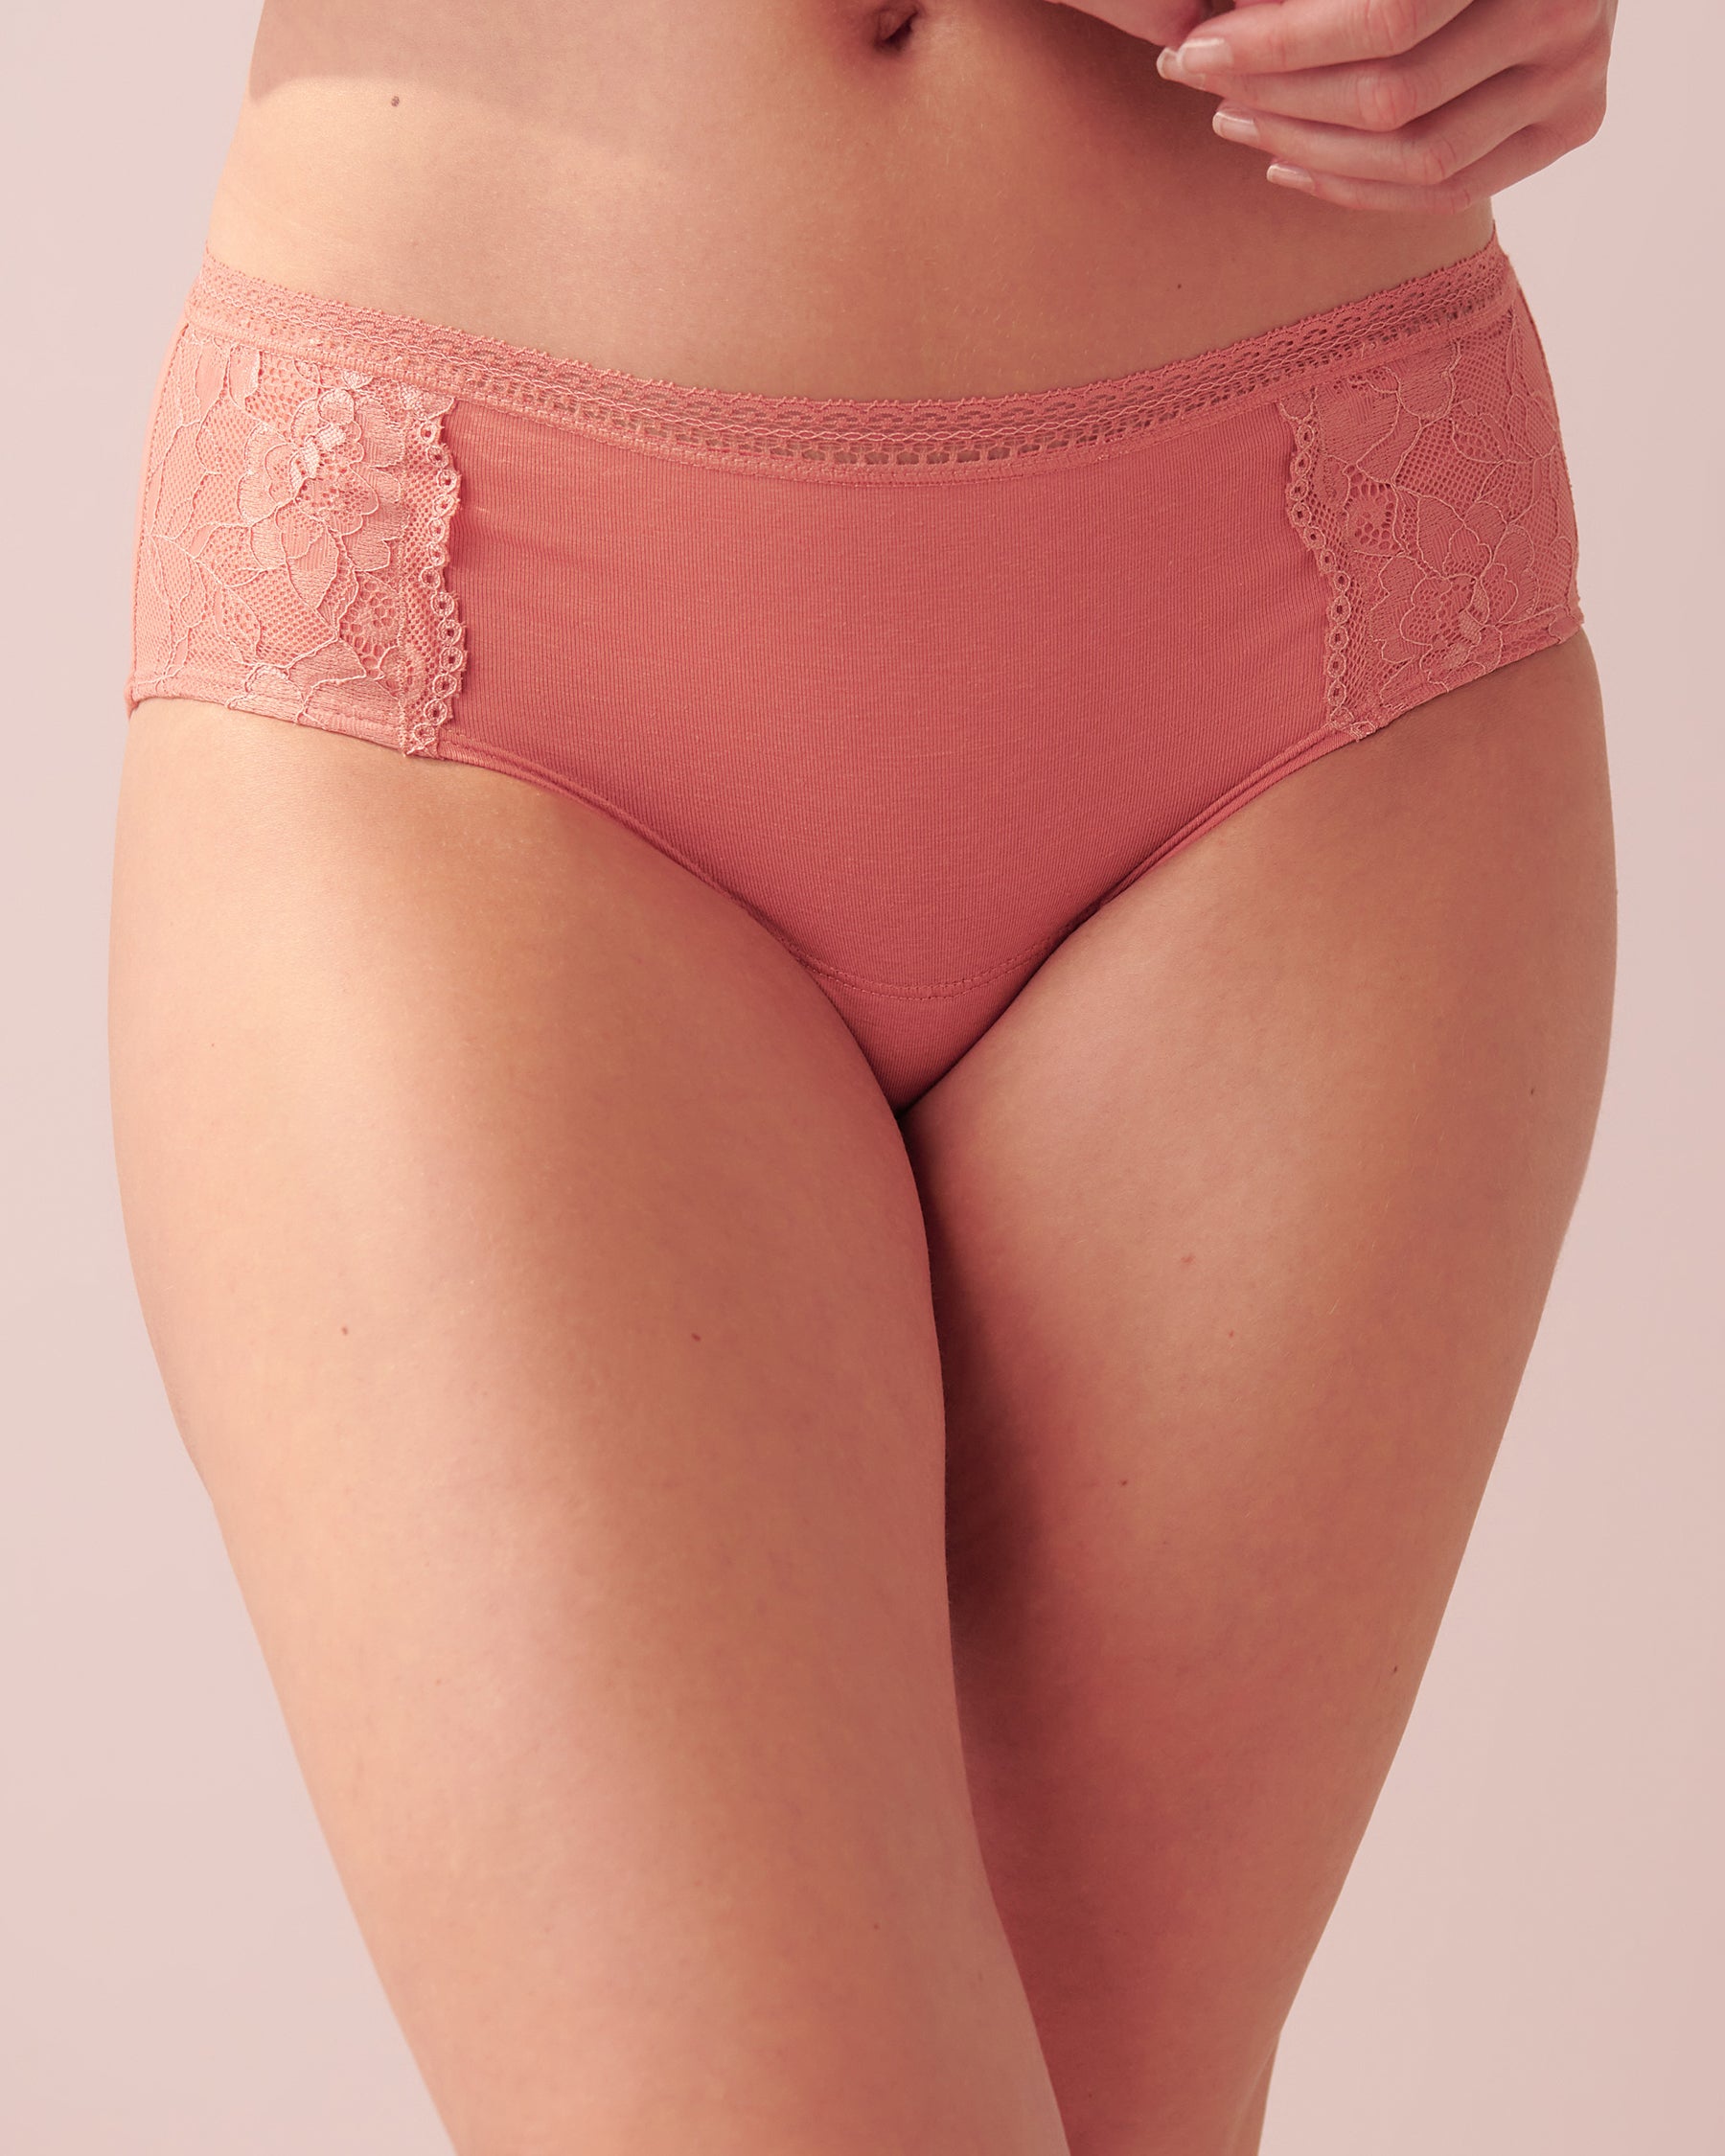 Lace Detail Thong Period Panty by Newex